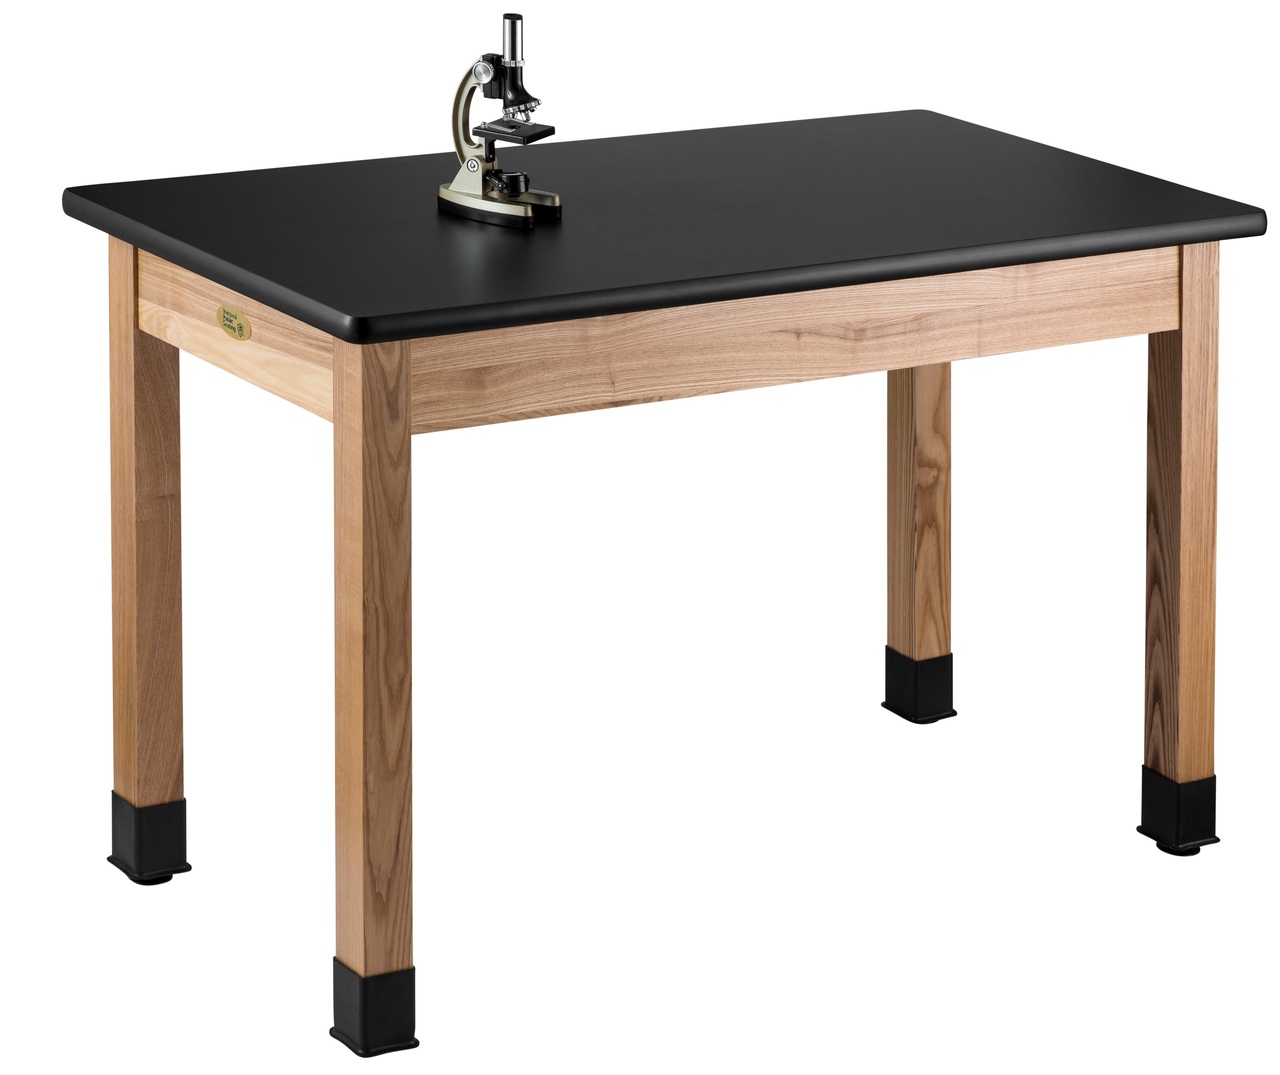 NPS Wood Science Lab Table -  30"x60"x30" -  HPL Top - Black Top and Ash Leg